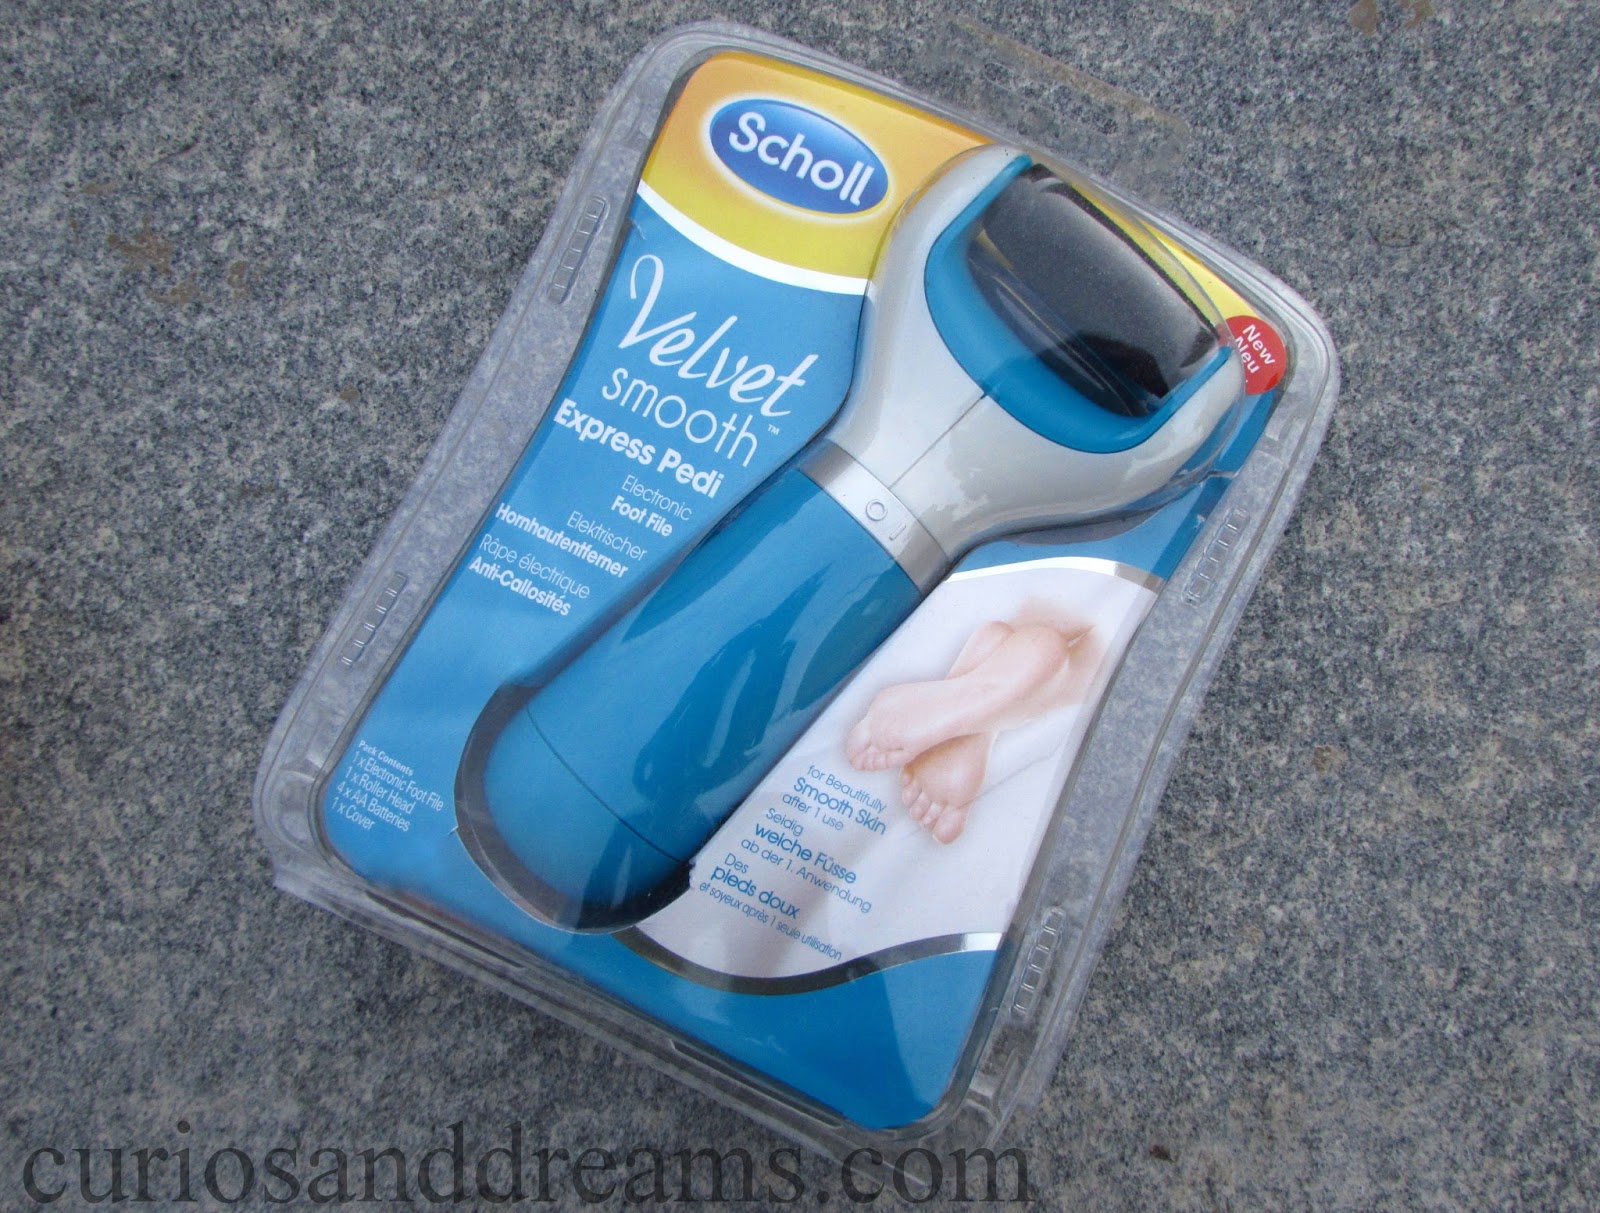 Echt Politie Billy Goat Scholl Velvet Smooth Express Pedi Electronic Foot File : Review & Effects -  Curios and Dreams - Indian Skincare and Beauty